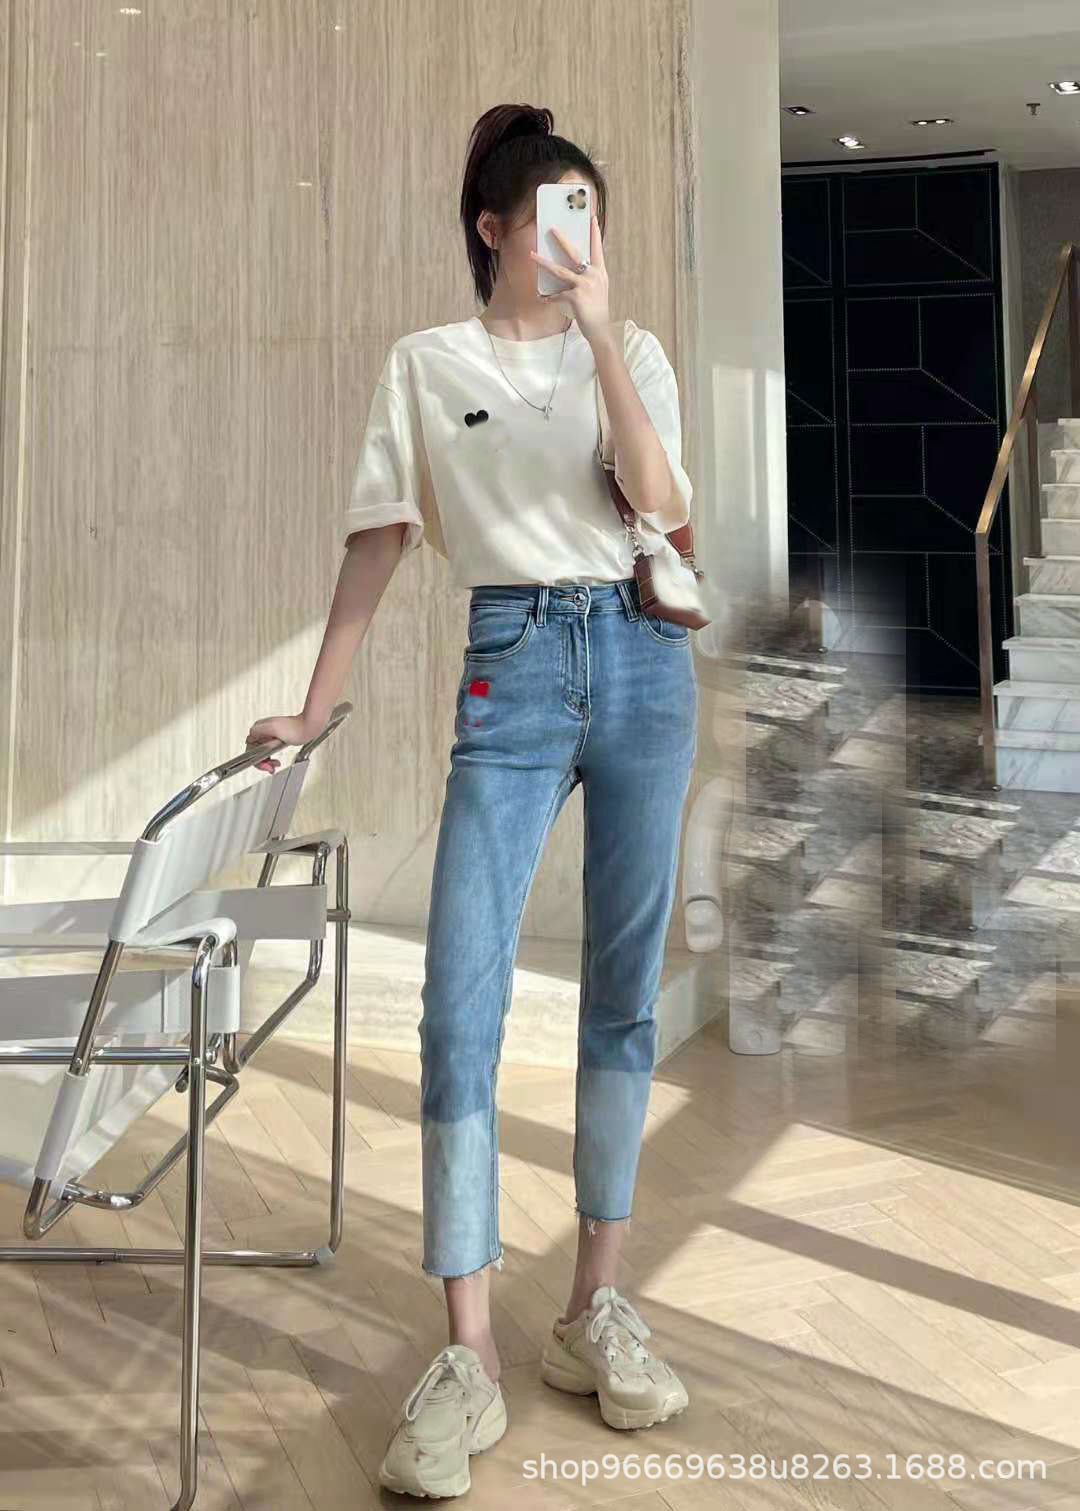 AM * 21 Autumn Light Blue Gradient Color Love Letter Embroidered High Waist Jeans Women's Slim Slimming Cropped Pants Women